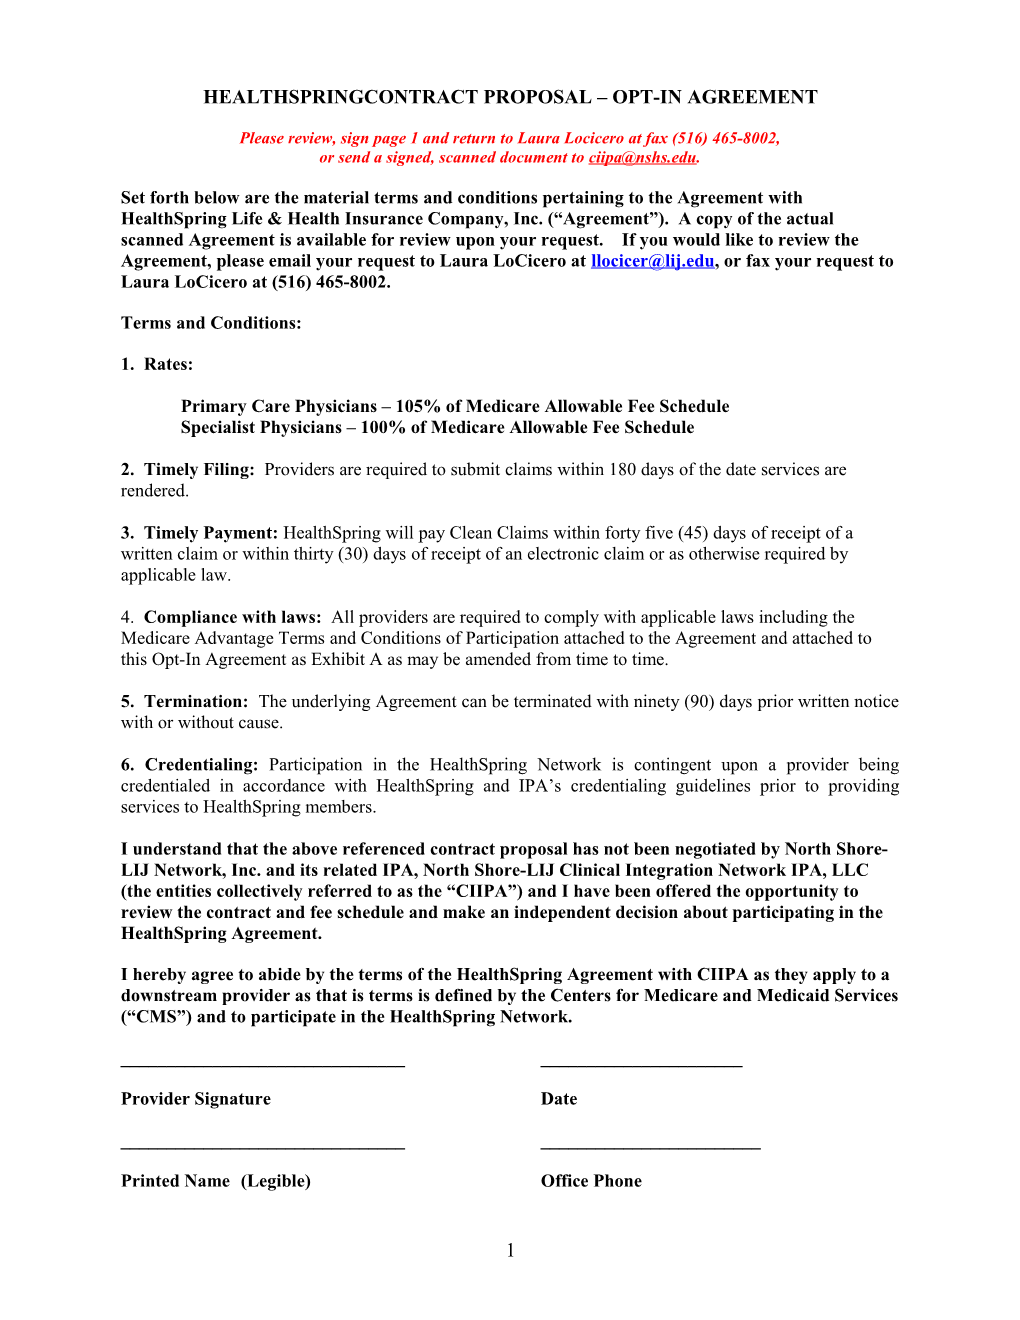 Contract Proposal Opt-In Agreement